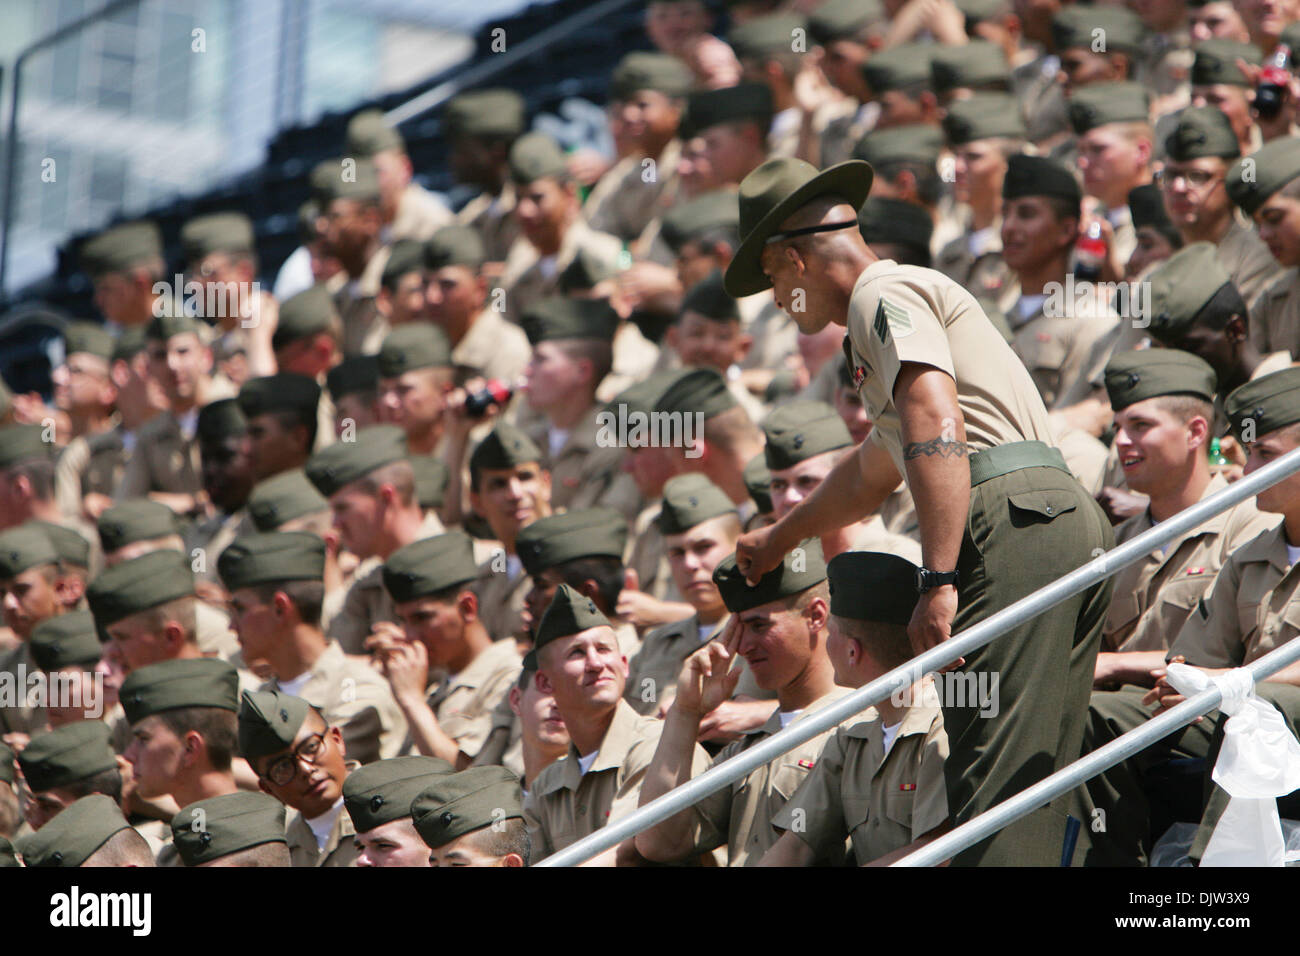 Us Marines From The Marine Corps Recruiting Depot In San Diego Ca Stock